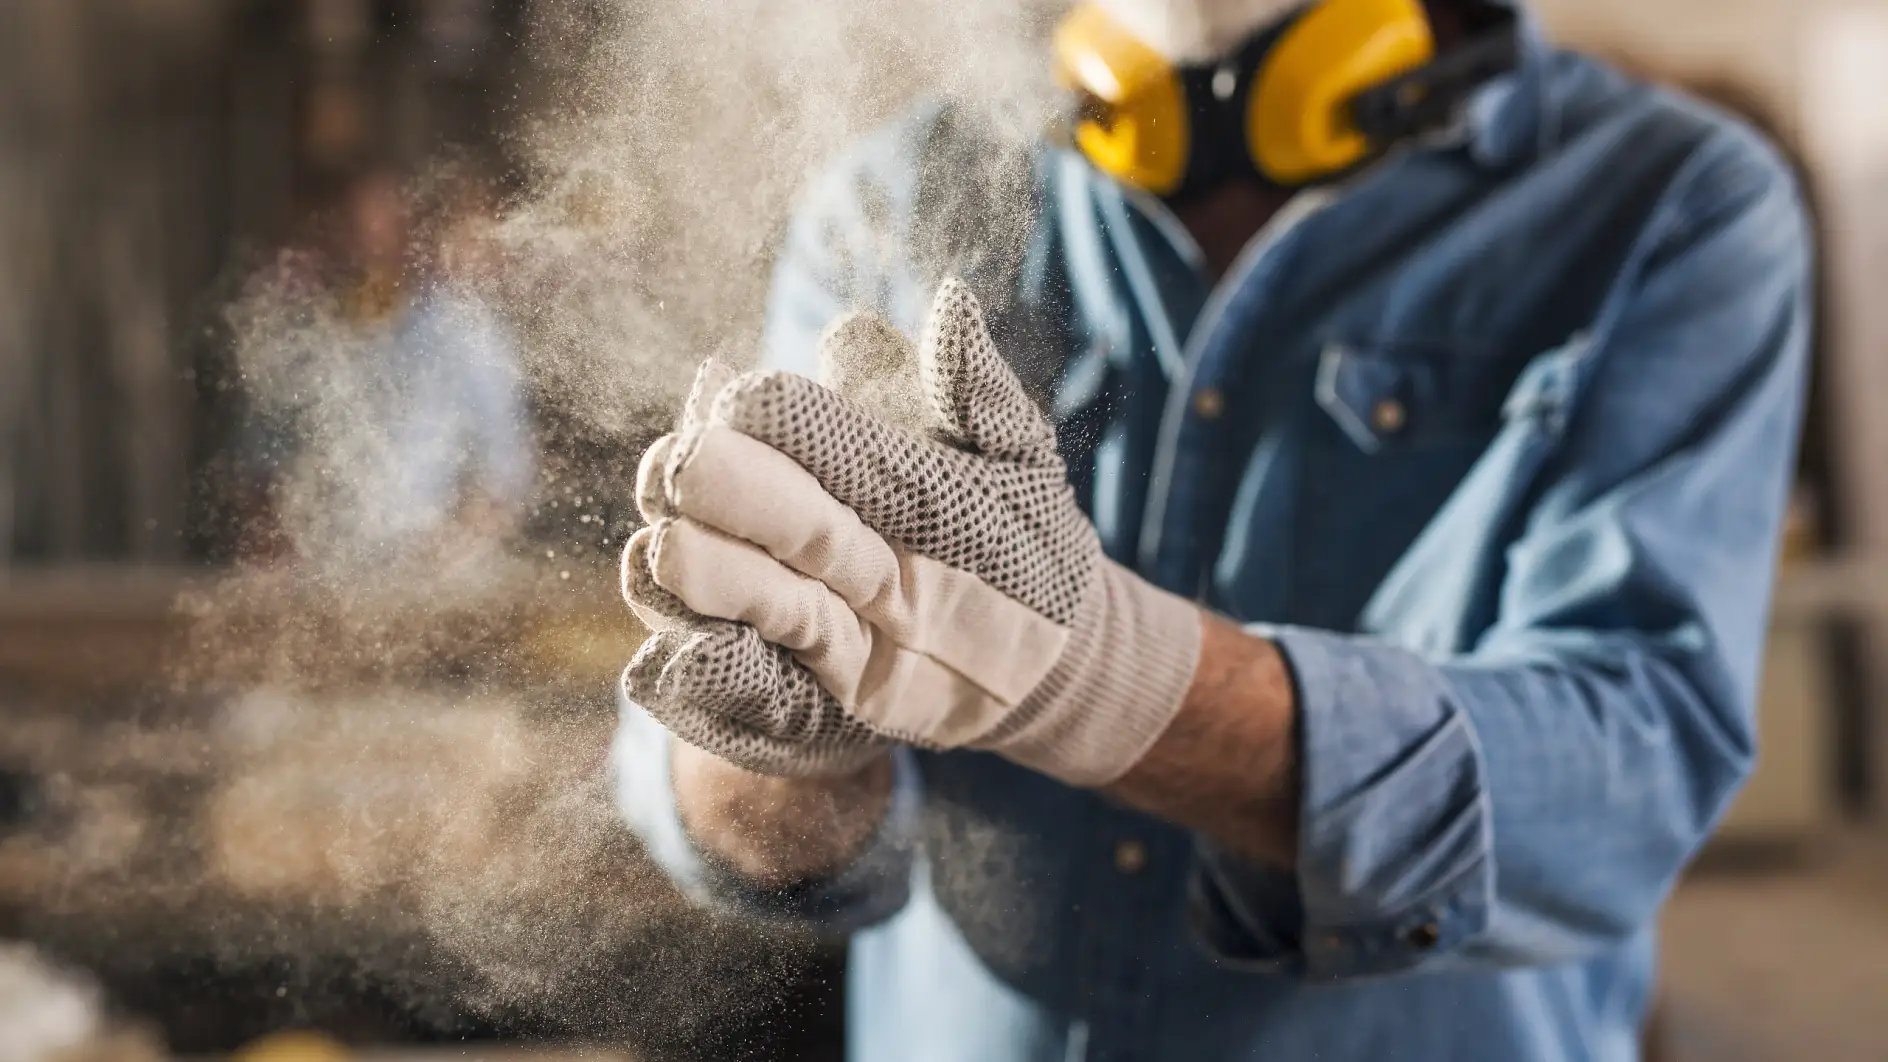 Close up of an unrecognizable male hands with work gloves on, clapping to remove sawdust